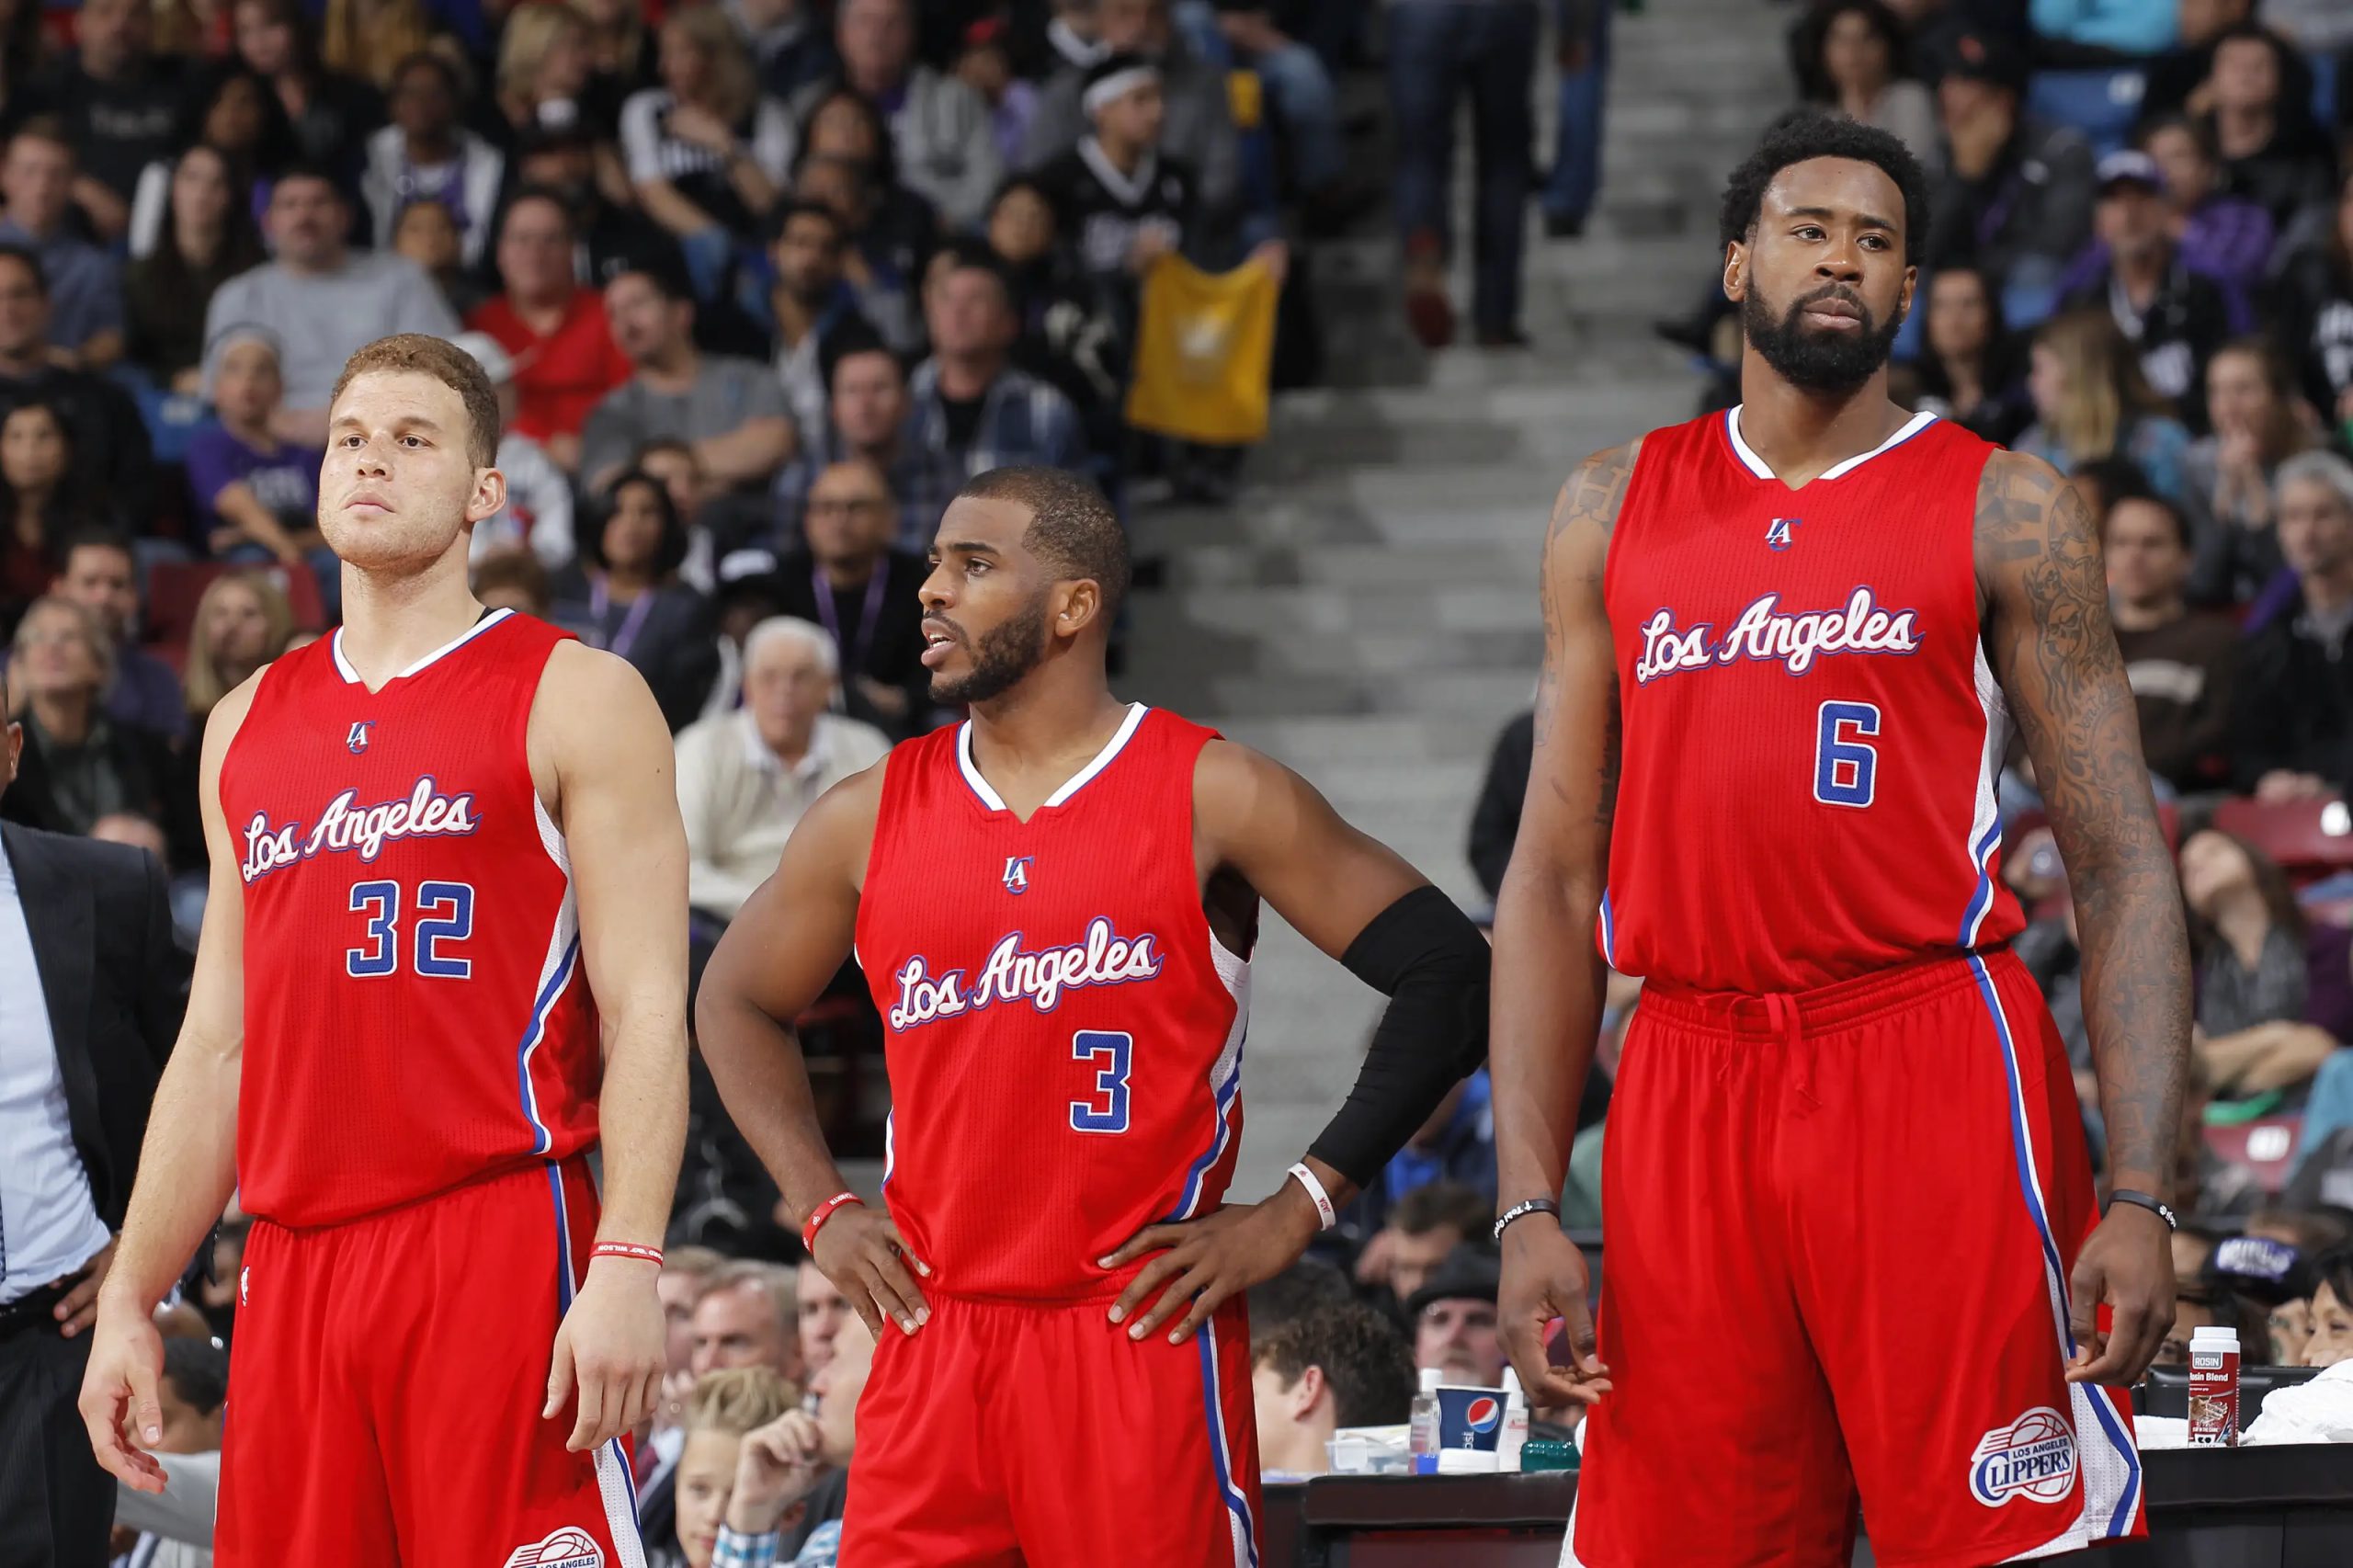 The 2013-2014 Los Angles Clippers